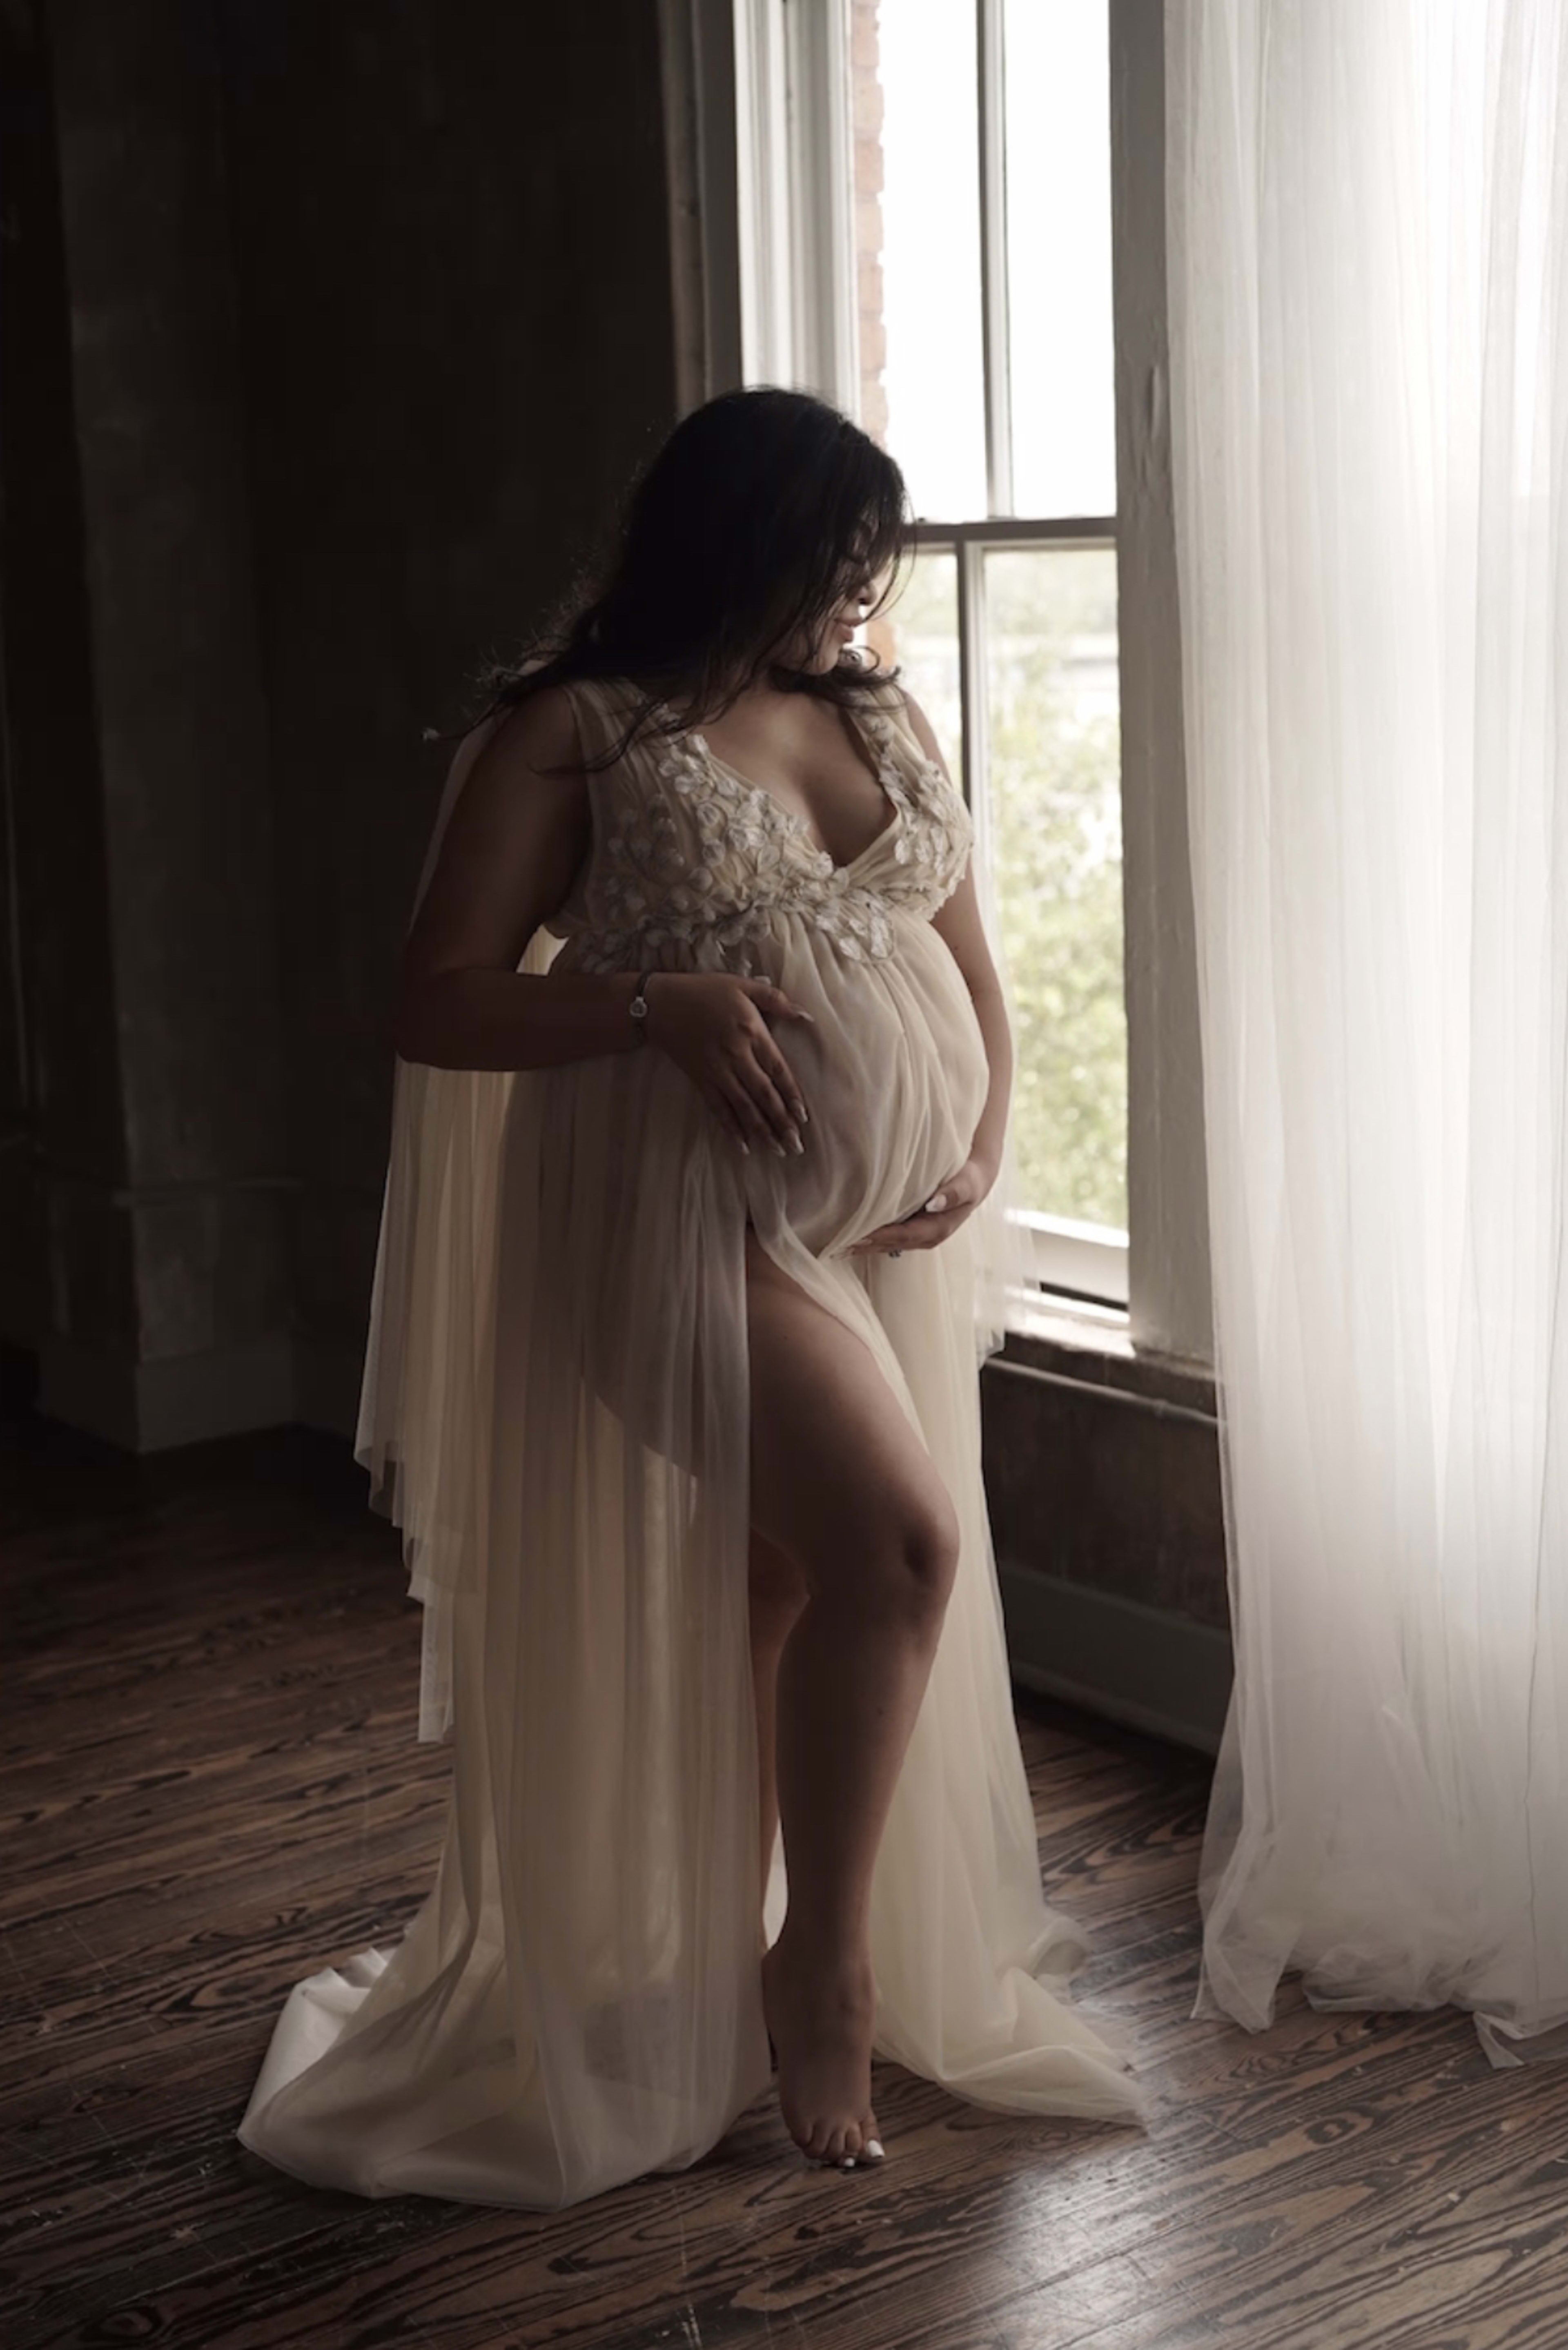 A maternity photo shoot of a woman in a white dress standing in front of a window.